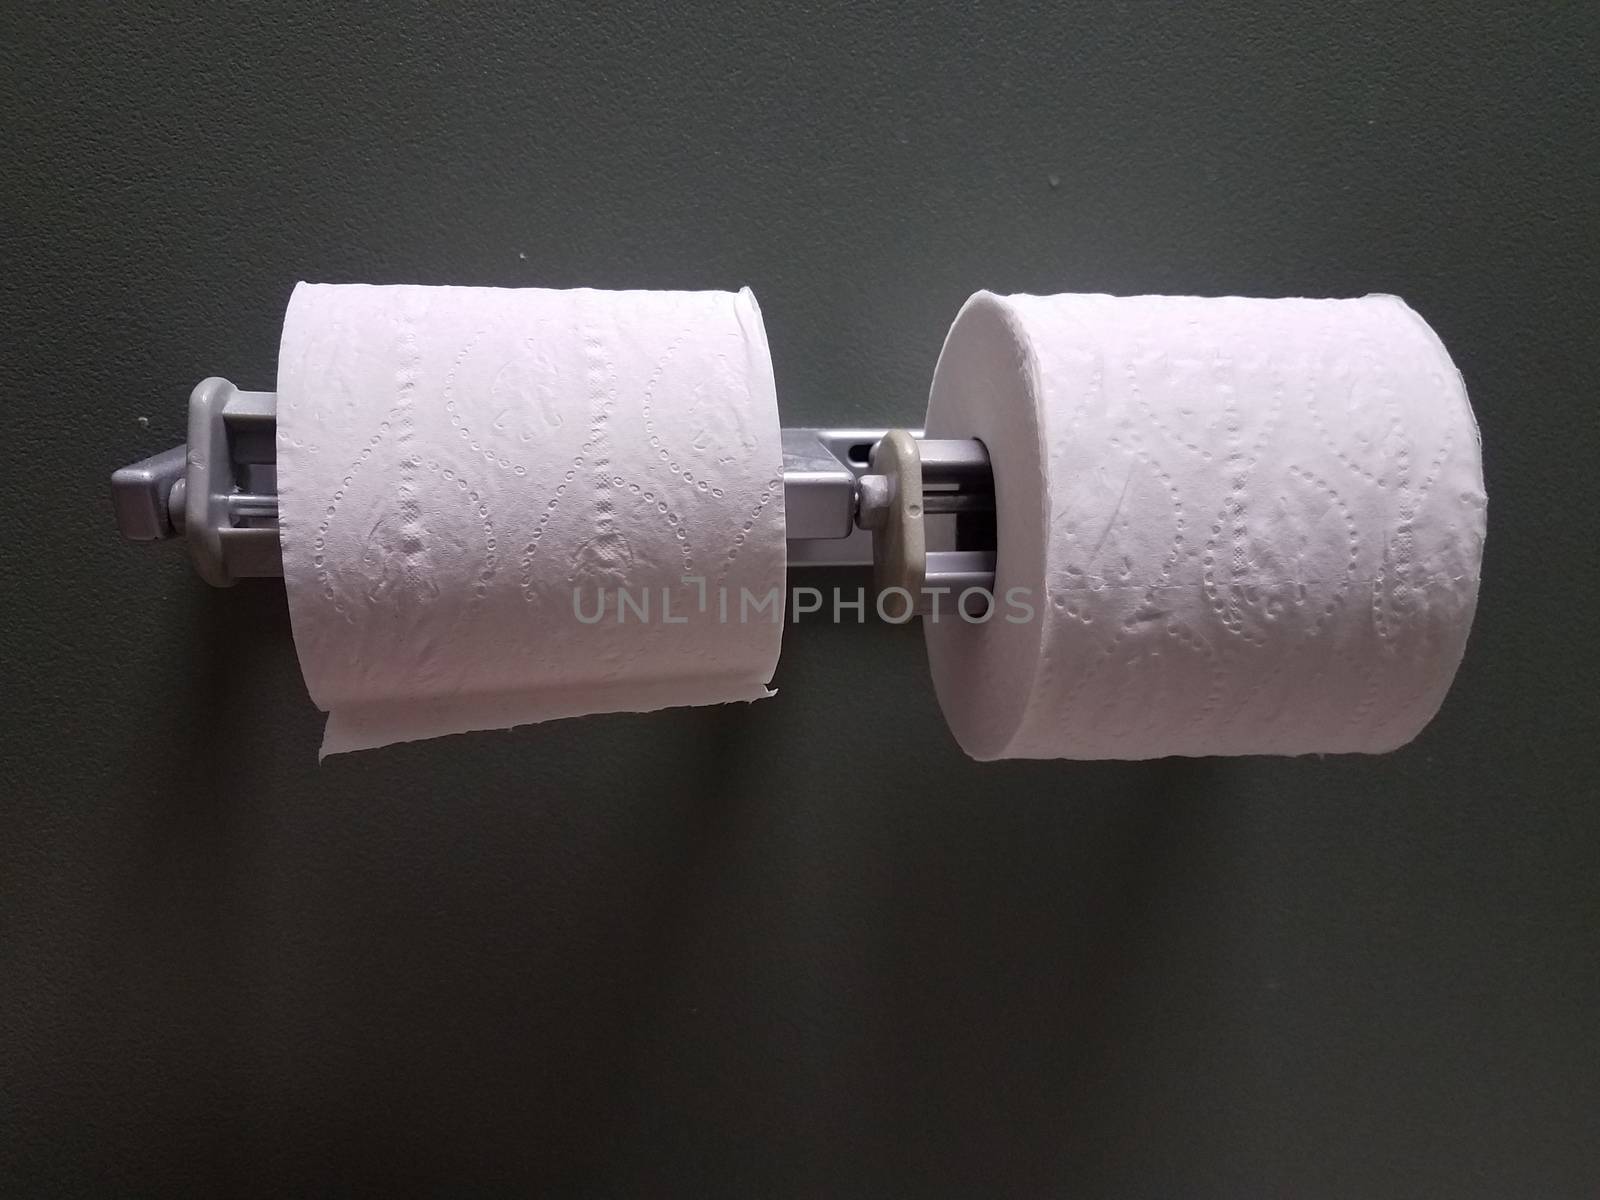 white toilet paper or tissue rolls in bathroom or restroom stall